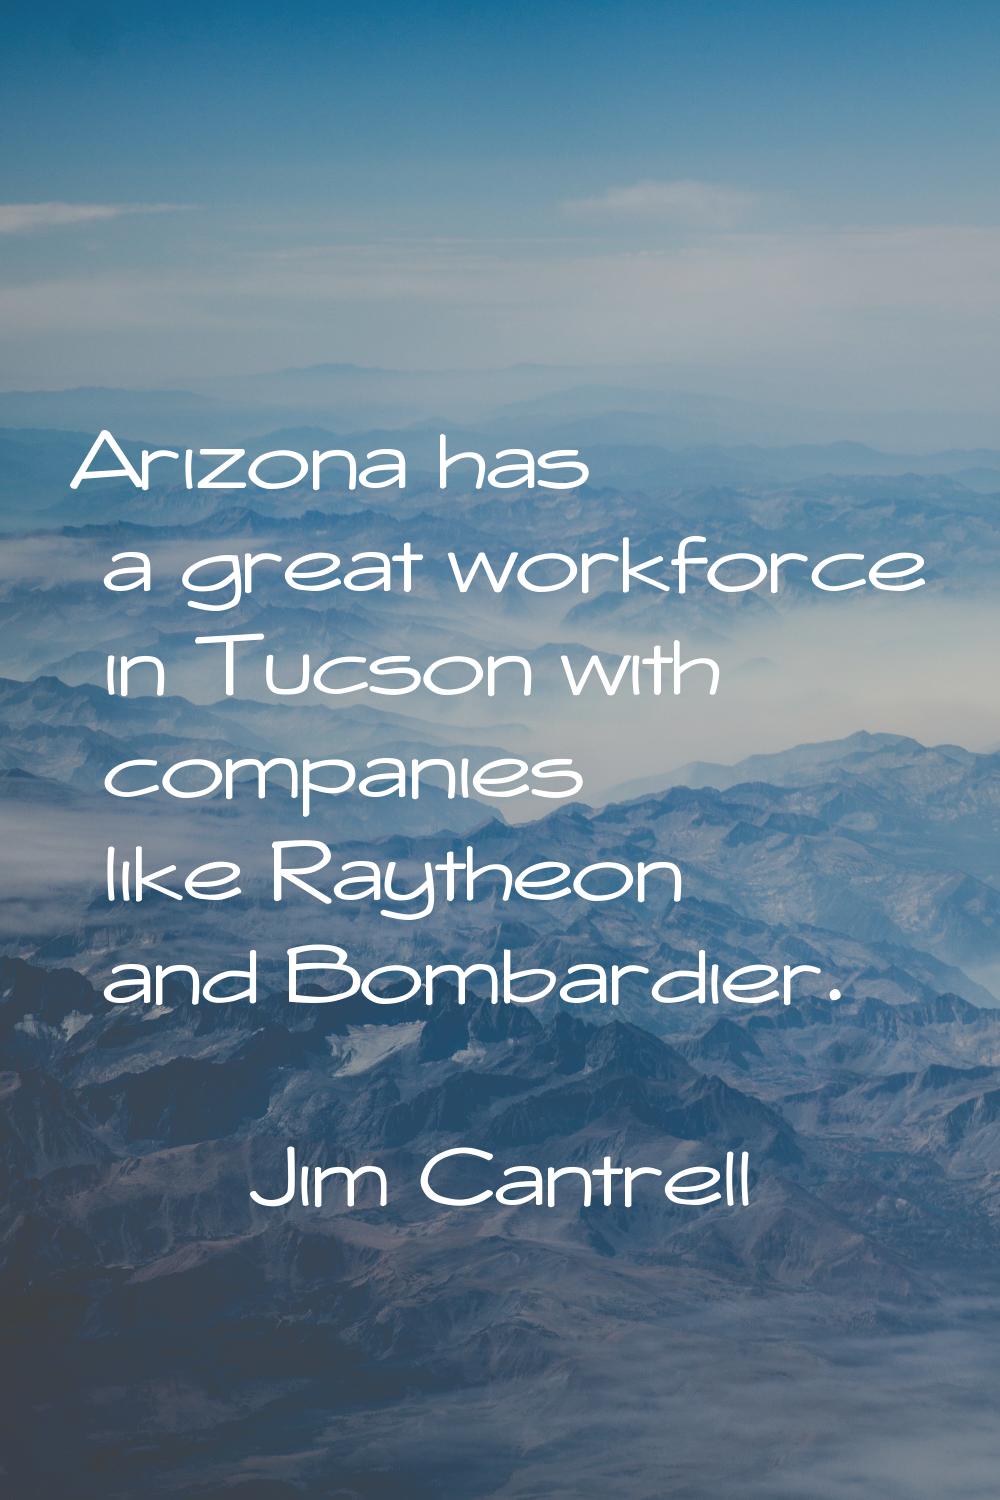 Arizona has a great workforce in Tucson with companies like Raytheon and Bombardier.